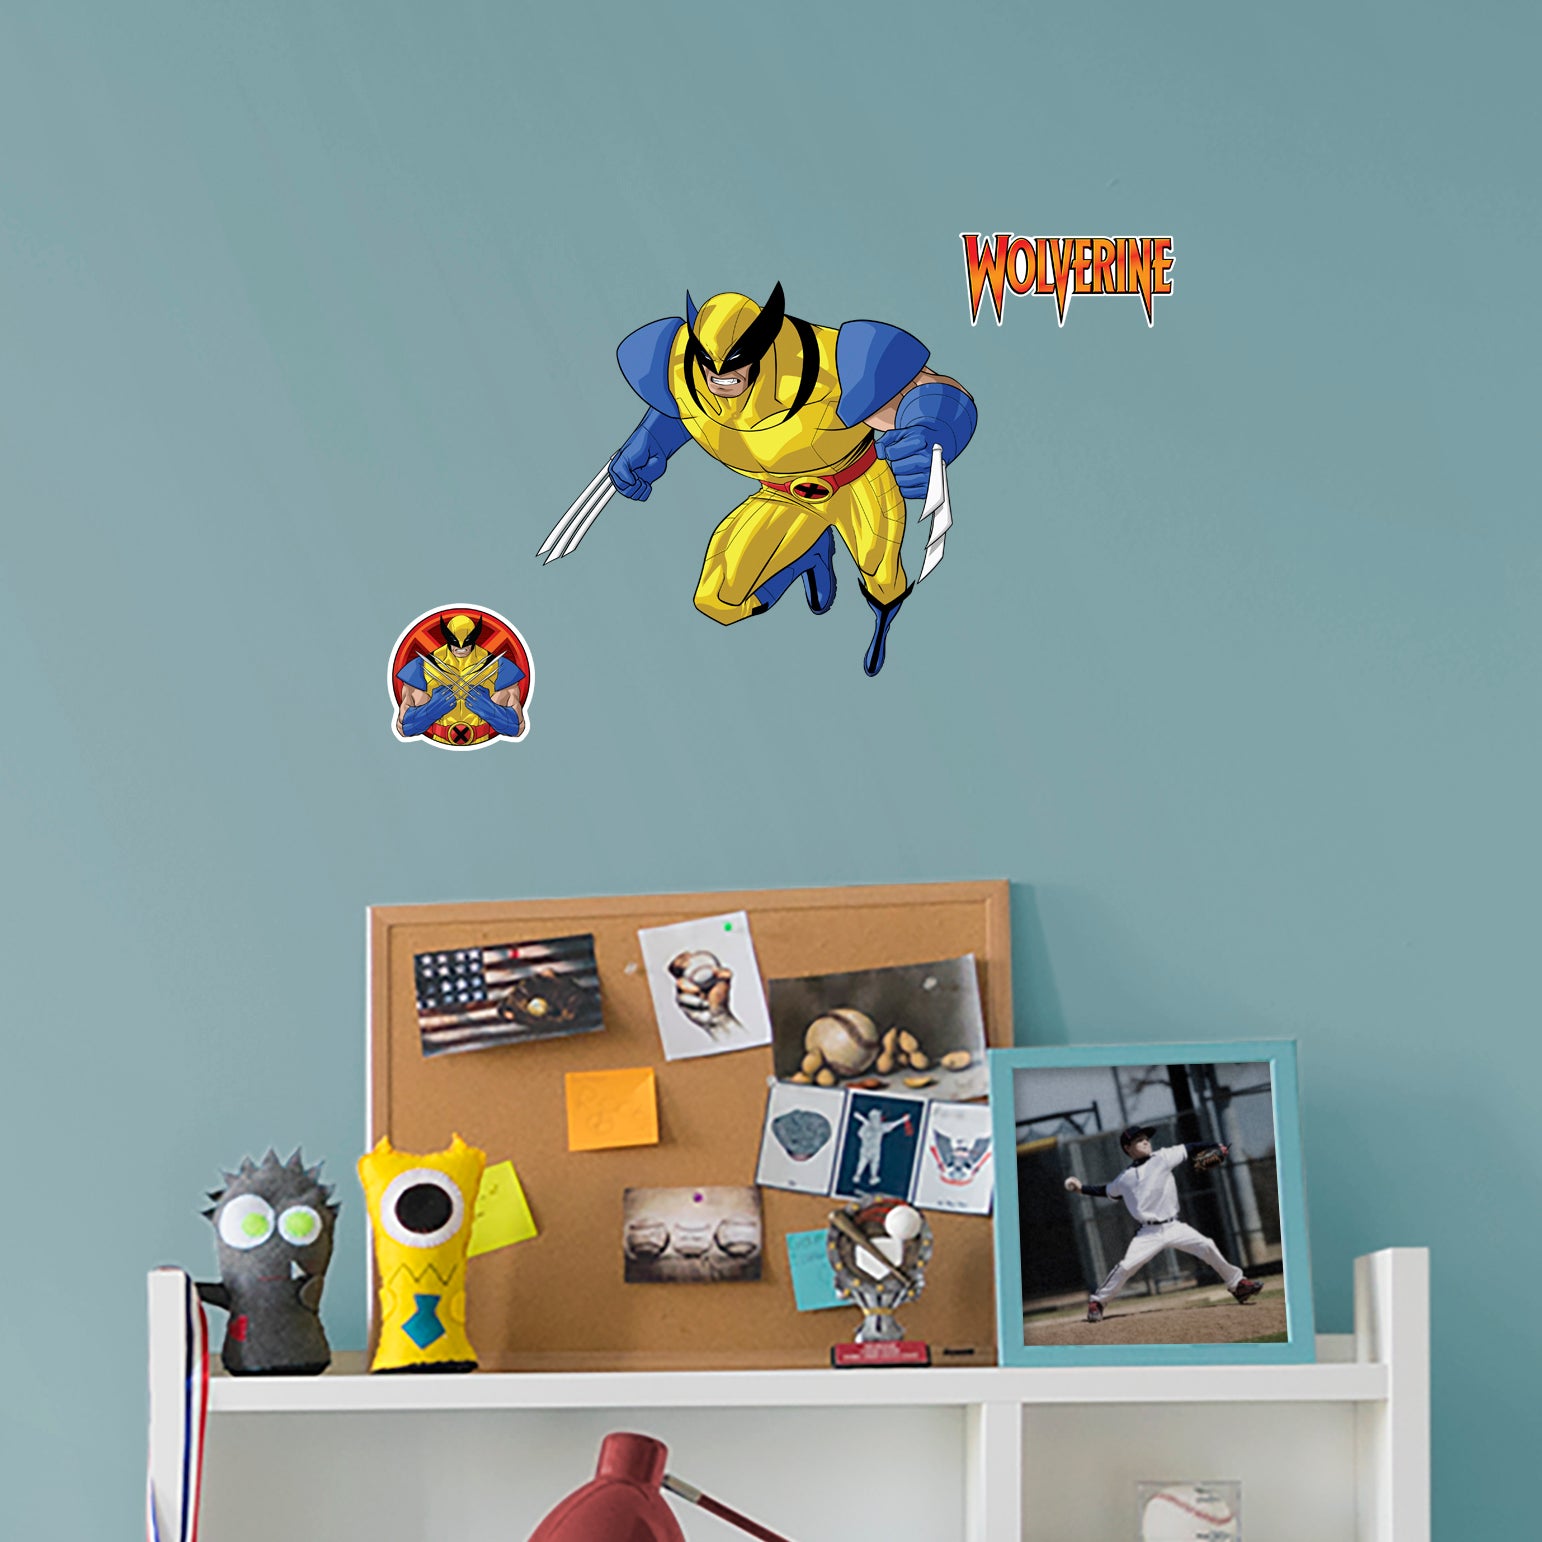 X-Men Wolverine RealBig - Officially Licensed Marvel Removable Wall Decal Large by Fathead | Vinyl